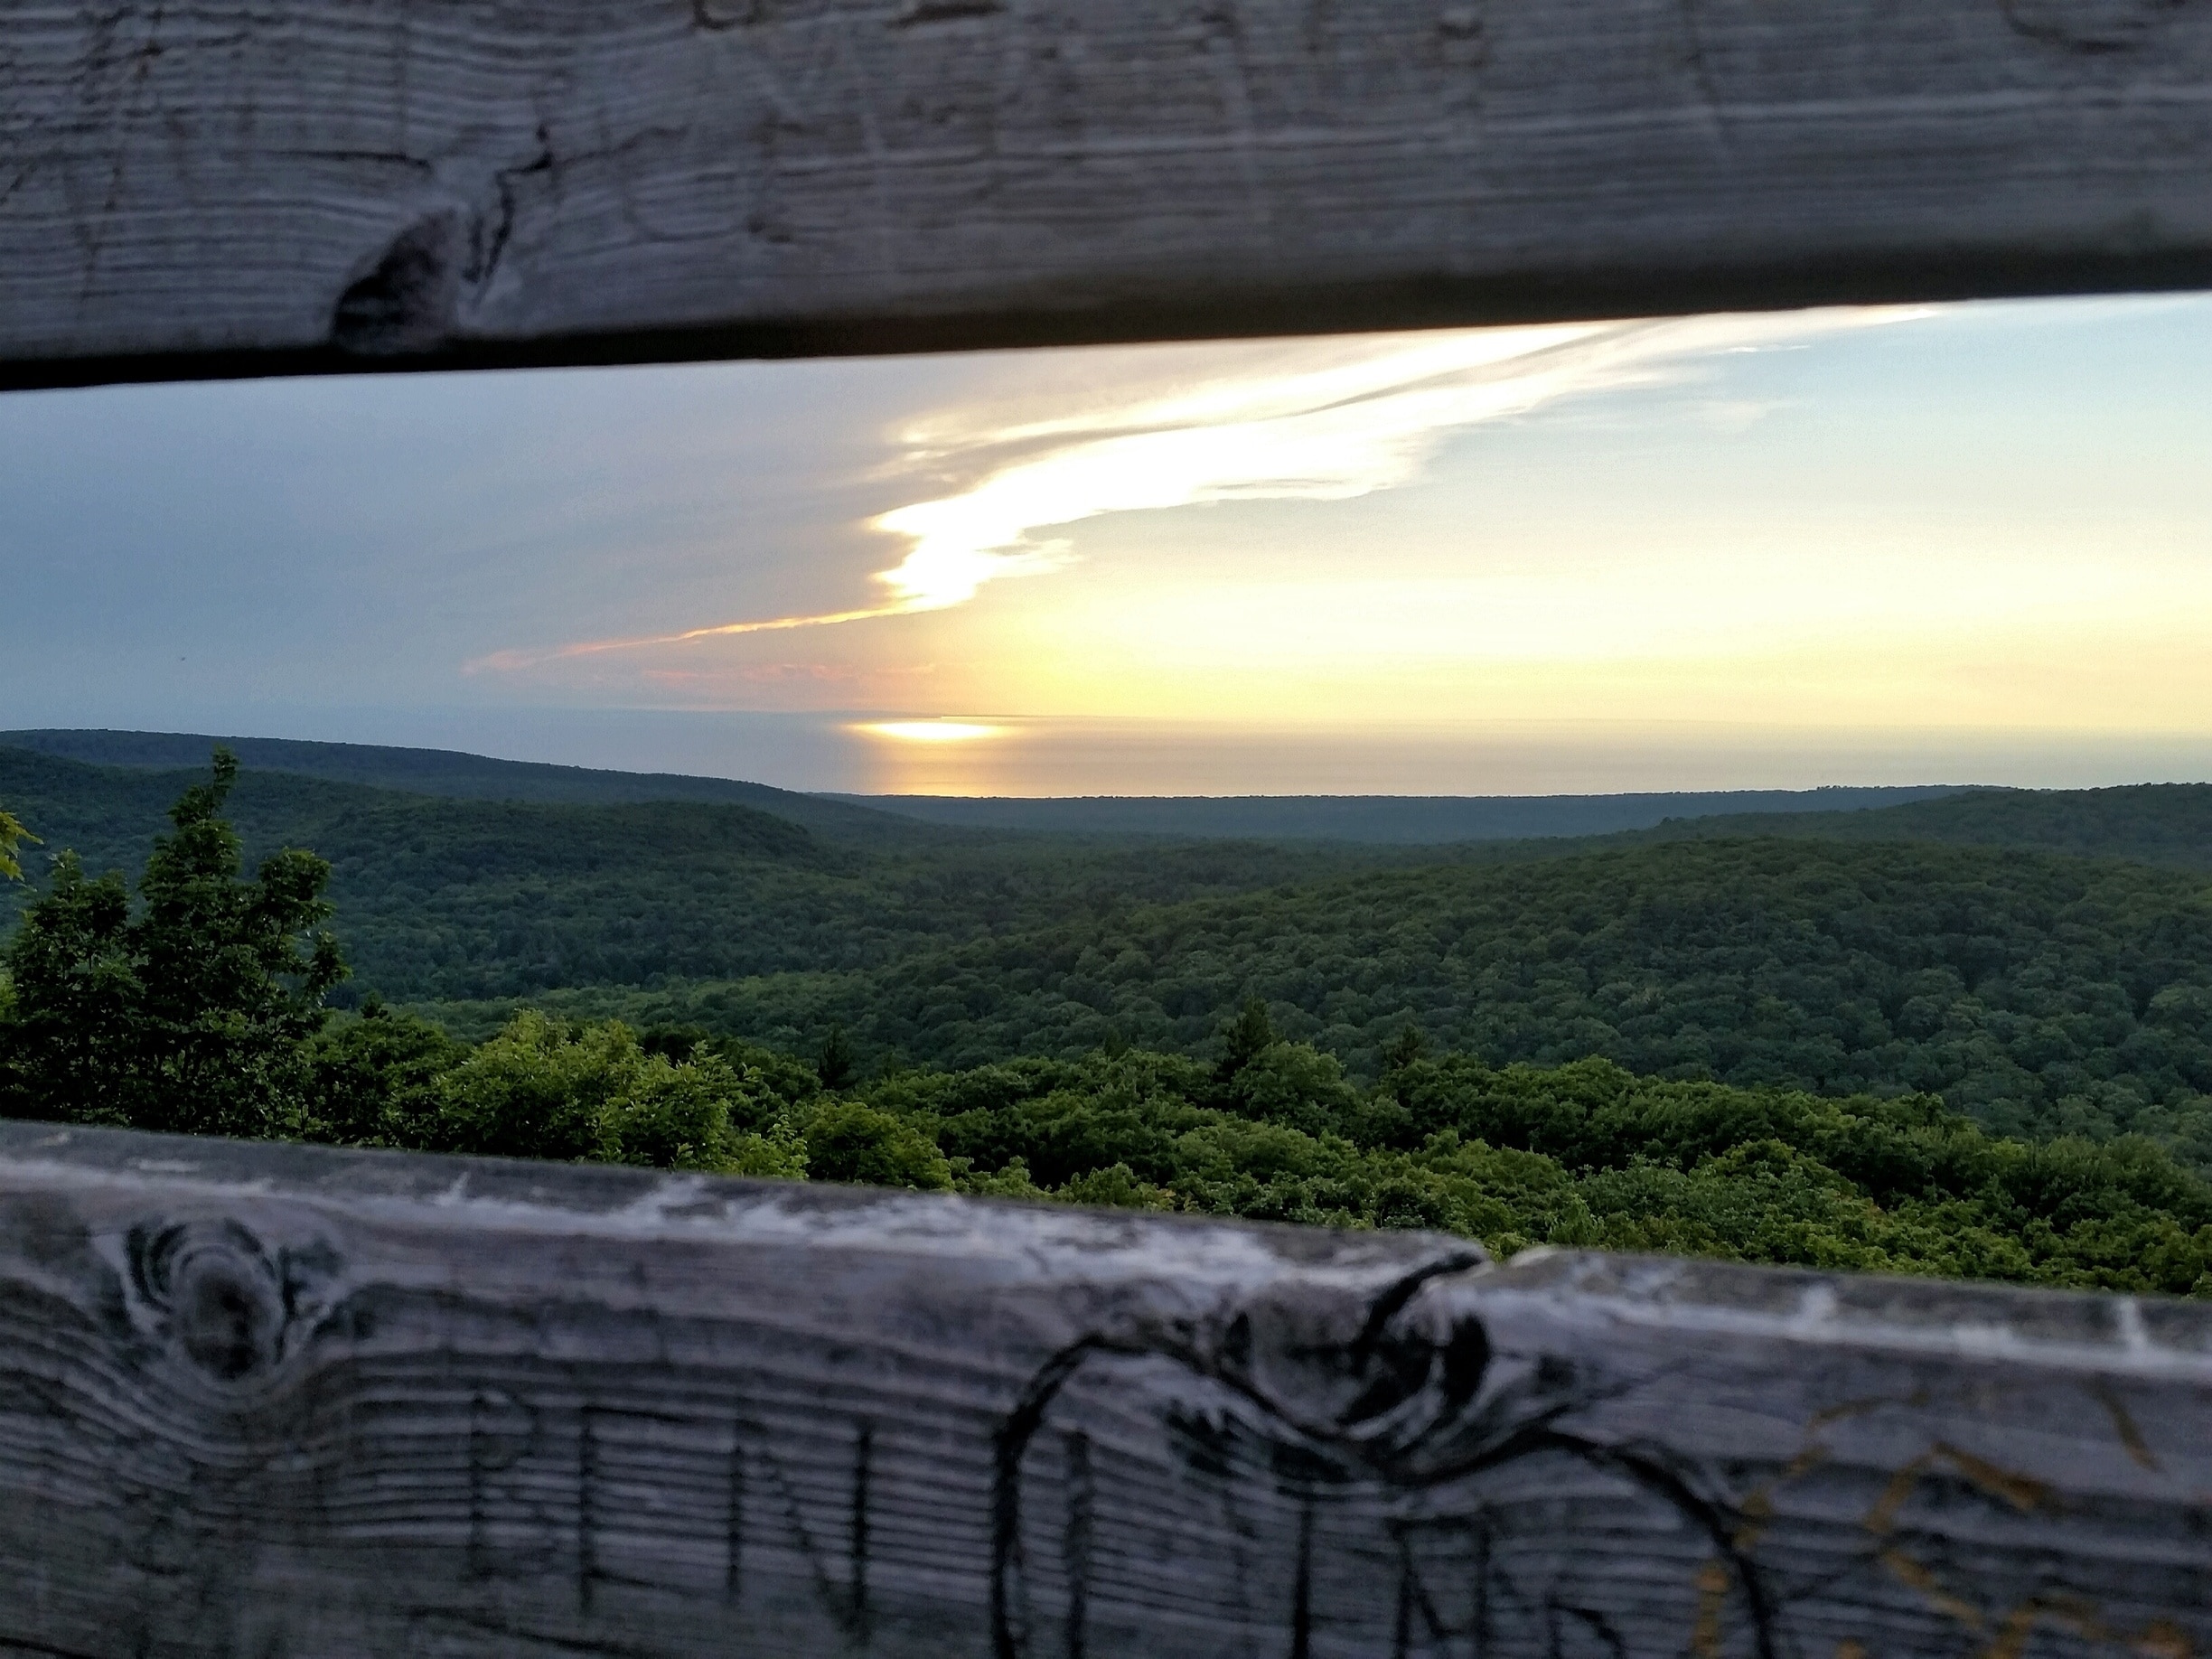 Between the wooden planks of the Summit Peak tower is an incredible view +1958 ft up. A must see just a dozen miles from the Porcupine Mountains visitors center. 